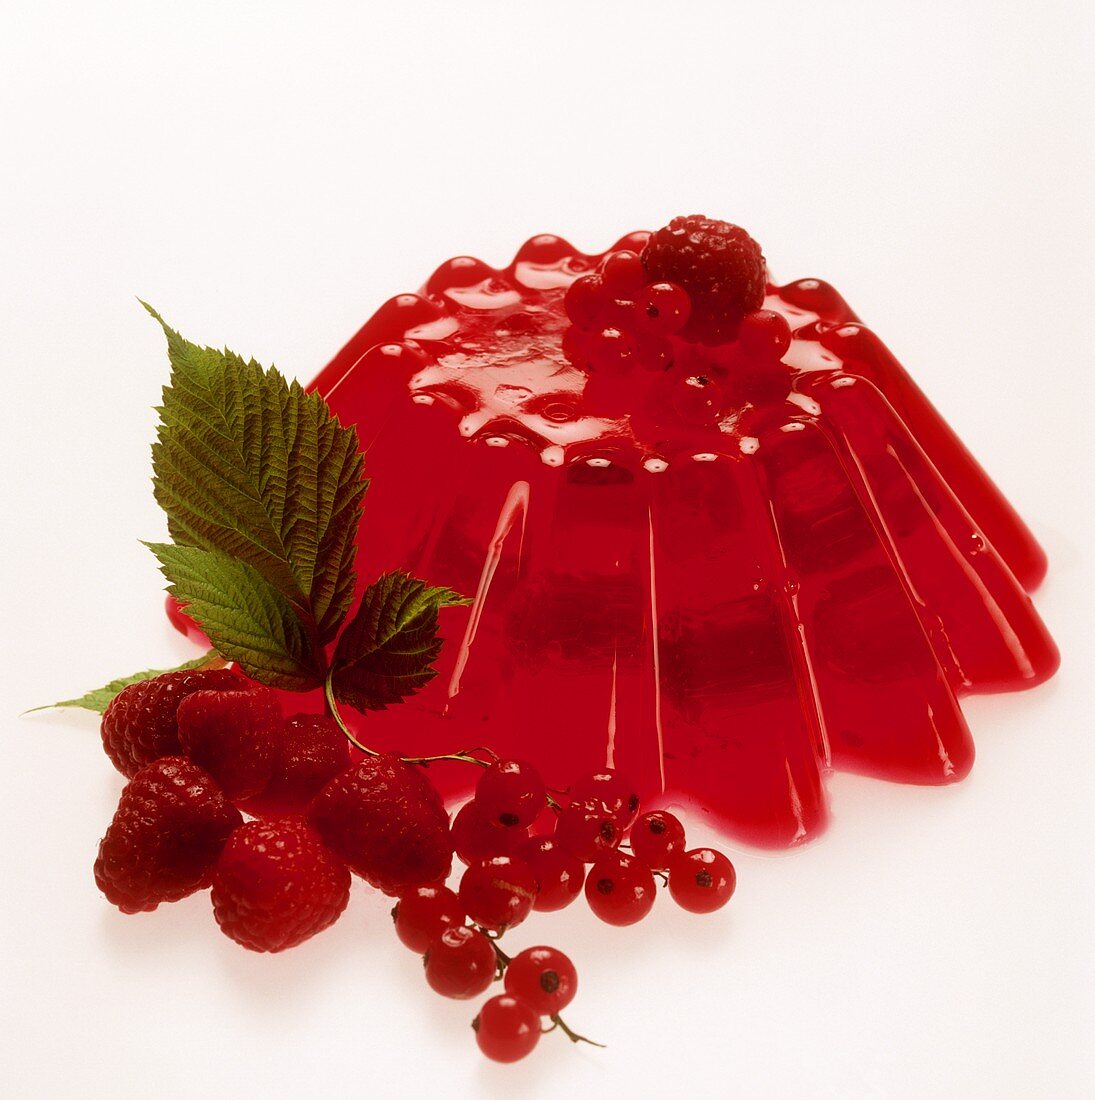 Red raspberry and redcurrant jelly